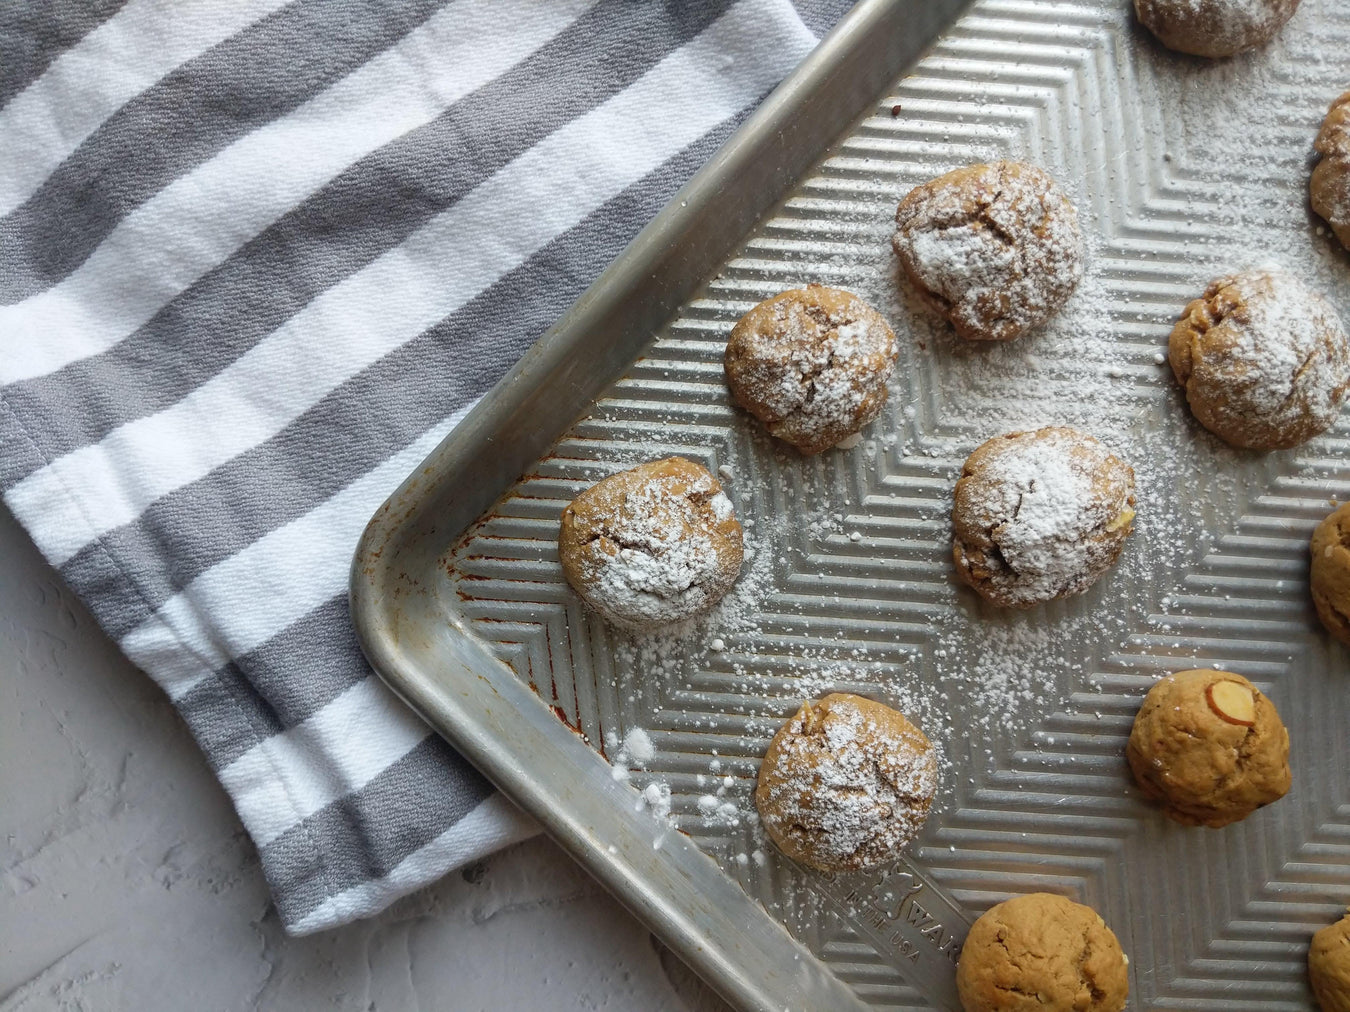 CHEF JESSICA'S SPICED GINGER COOKIE RECIPE